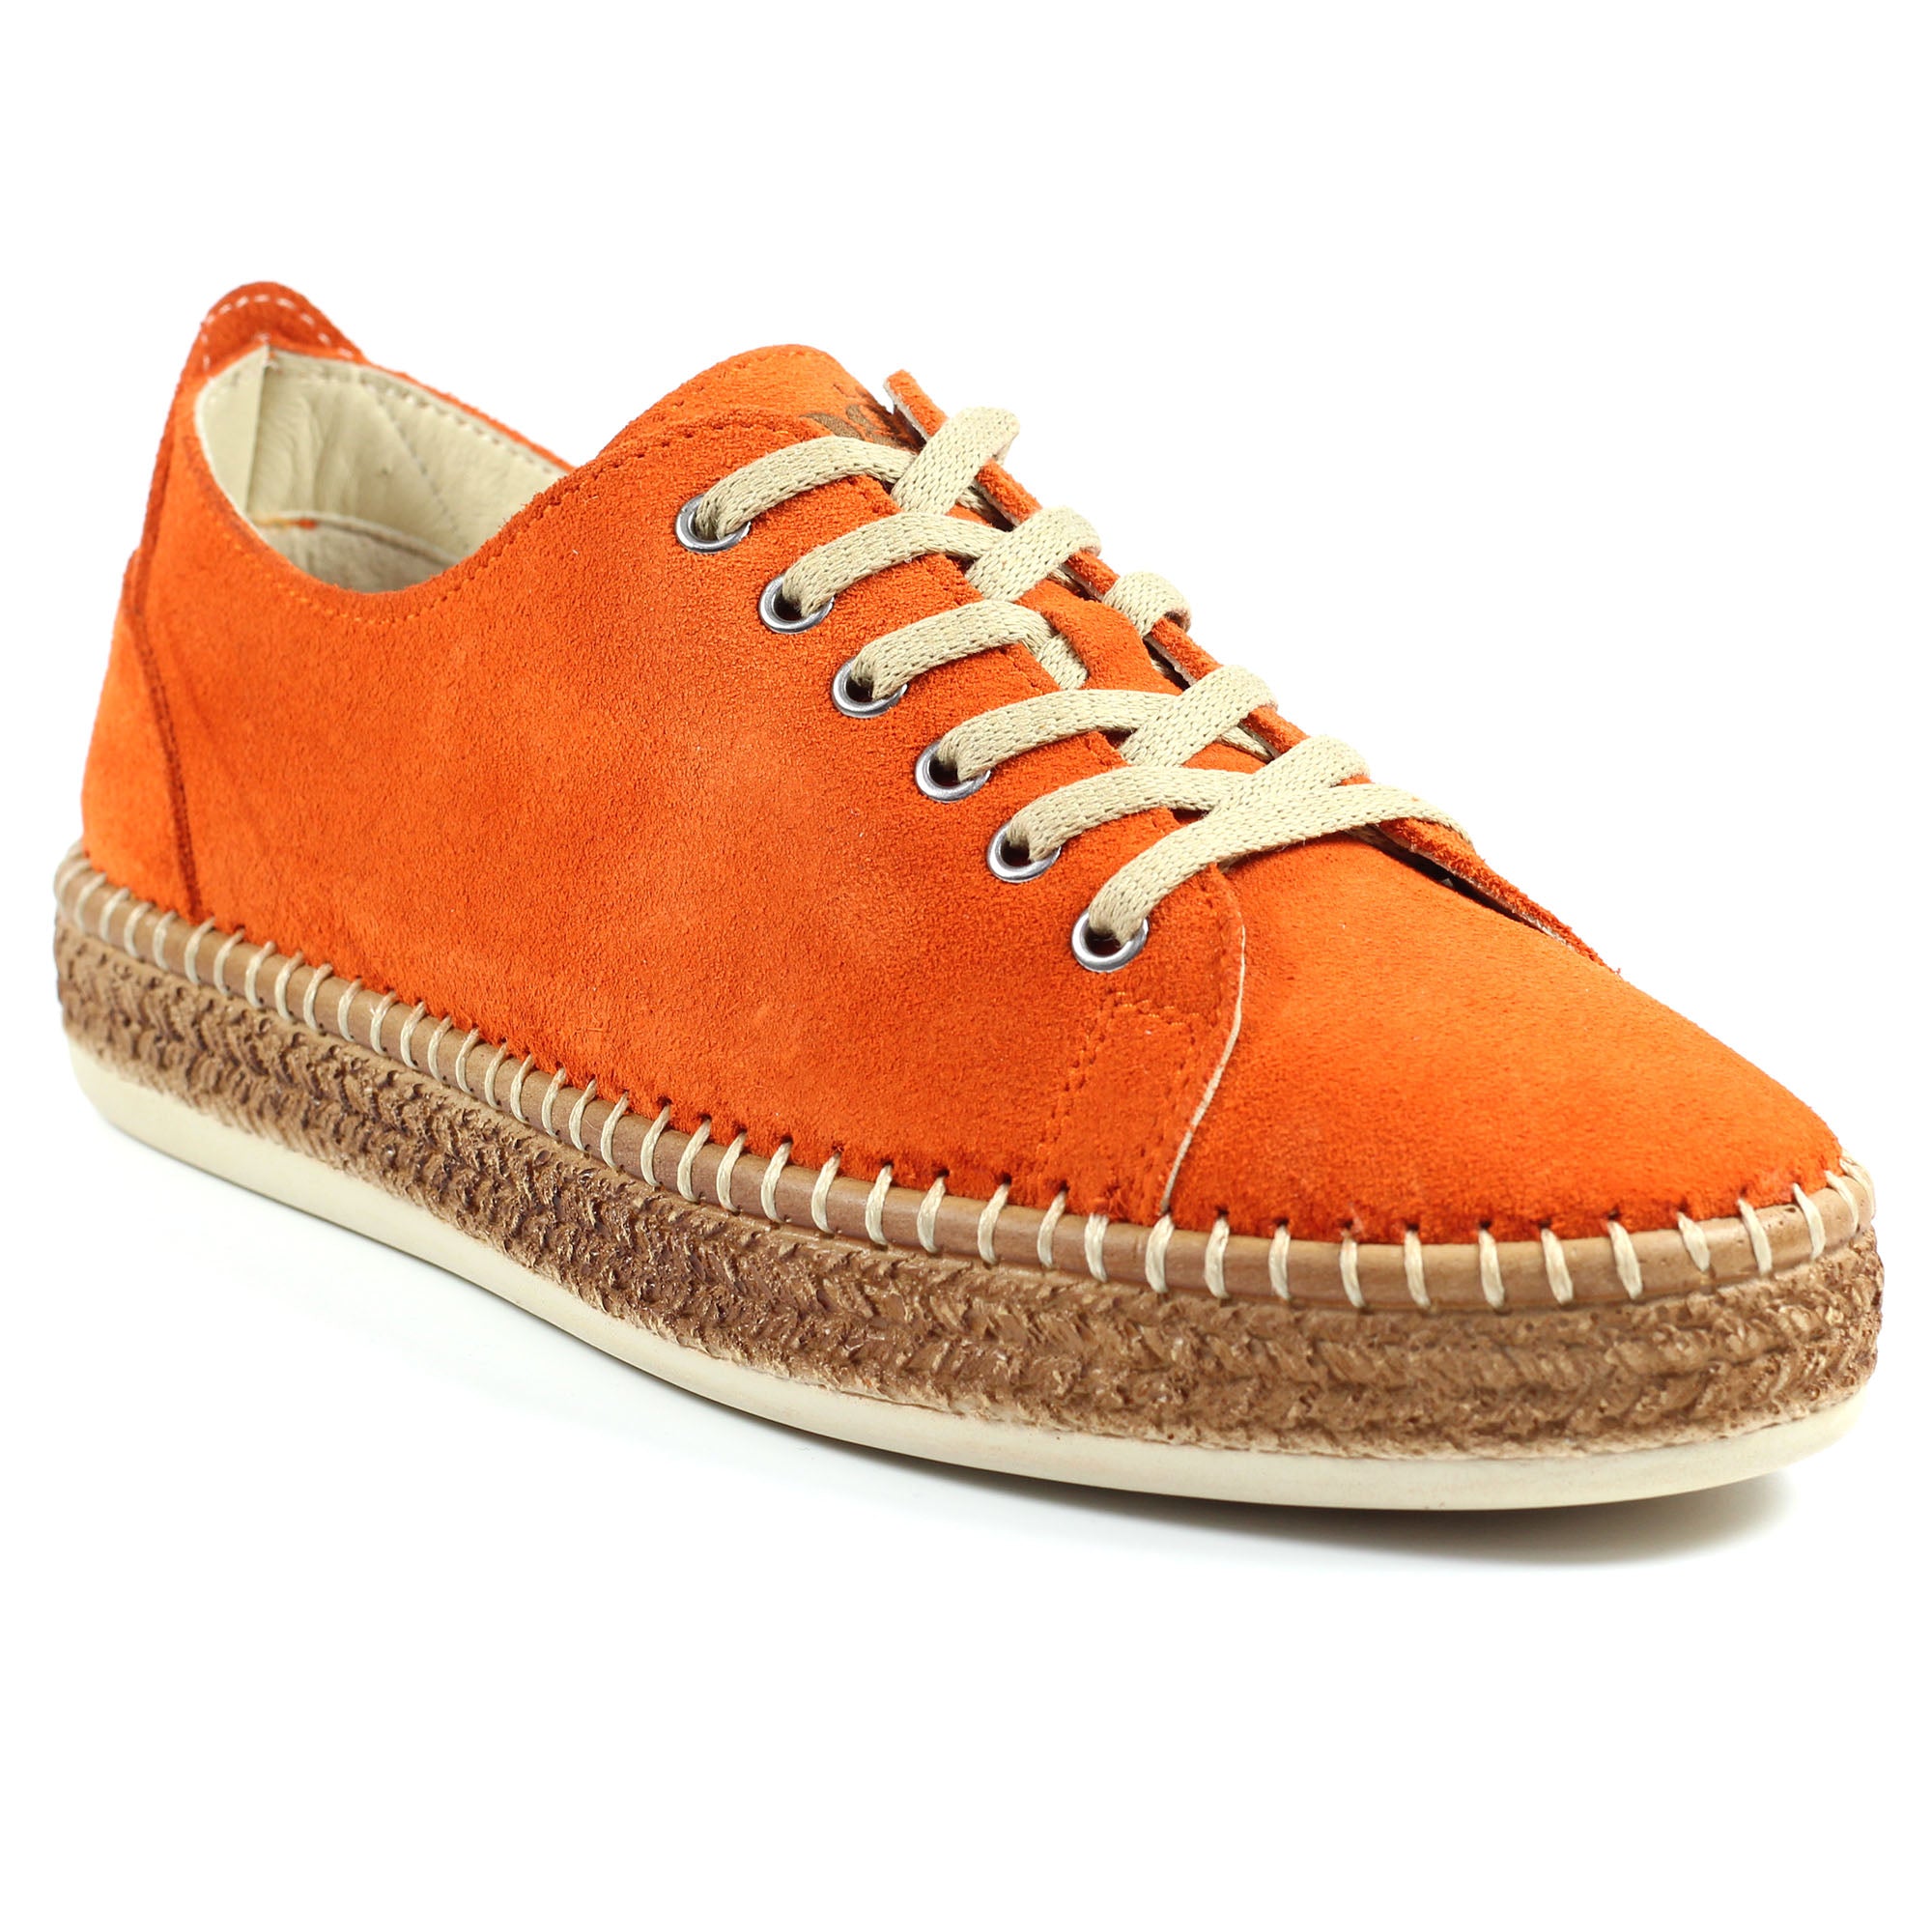 Lazy Dogs Maddison JLD010 Ladies Orange Suede Lace Up Shoes